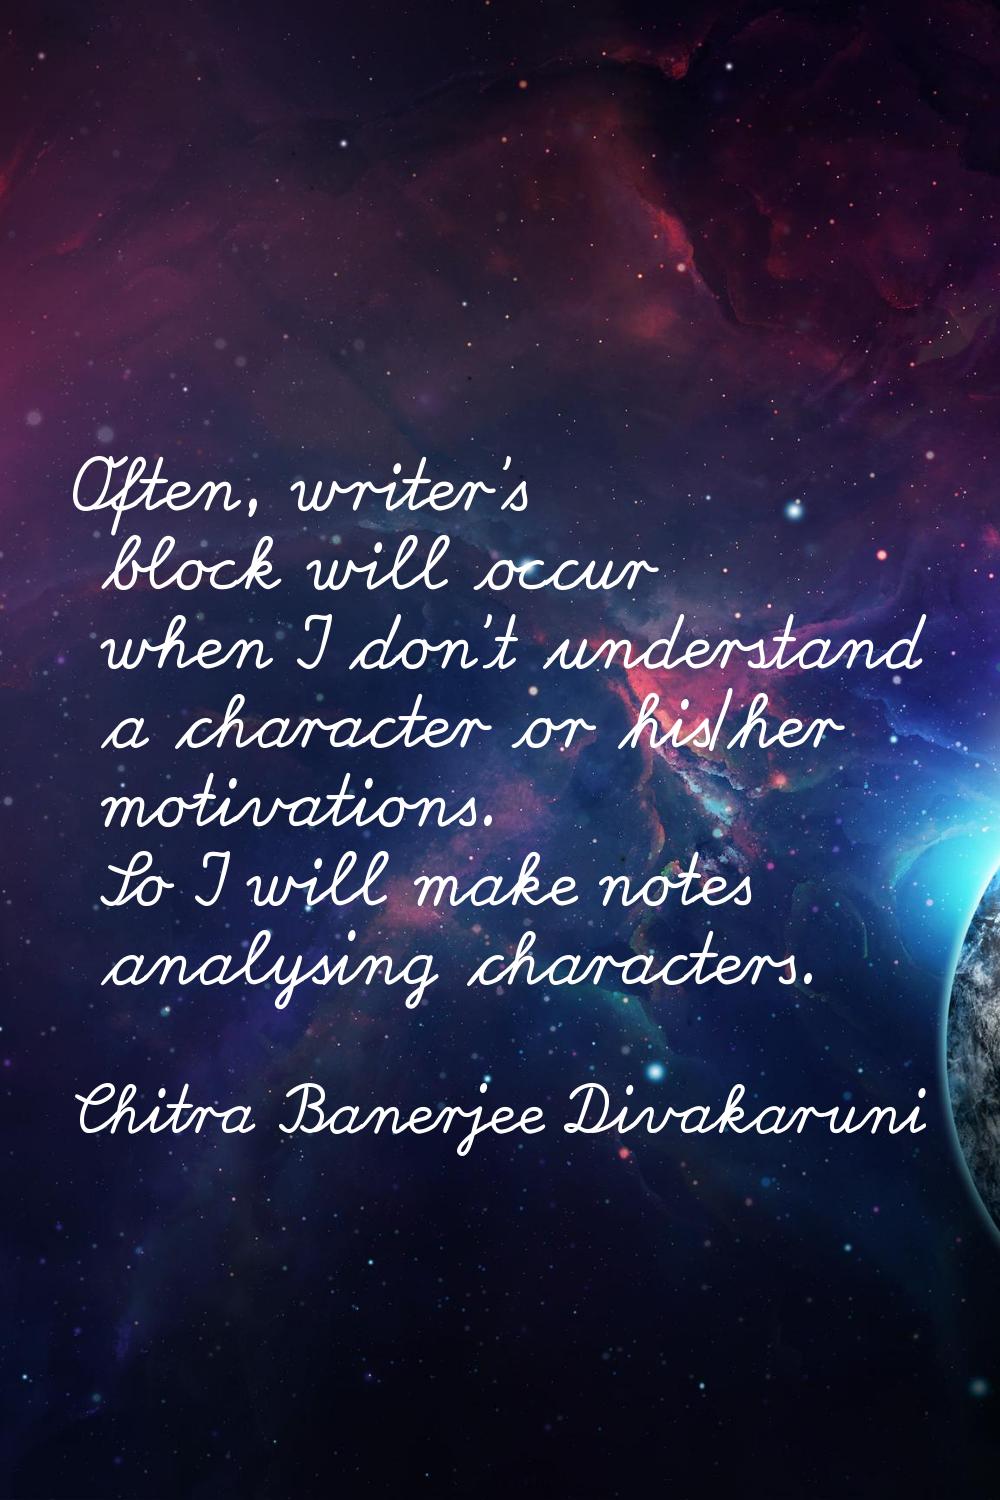 Often, writer's block will occur when I don't understand a character or his/her motivations. So I w